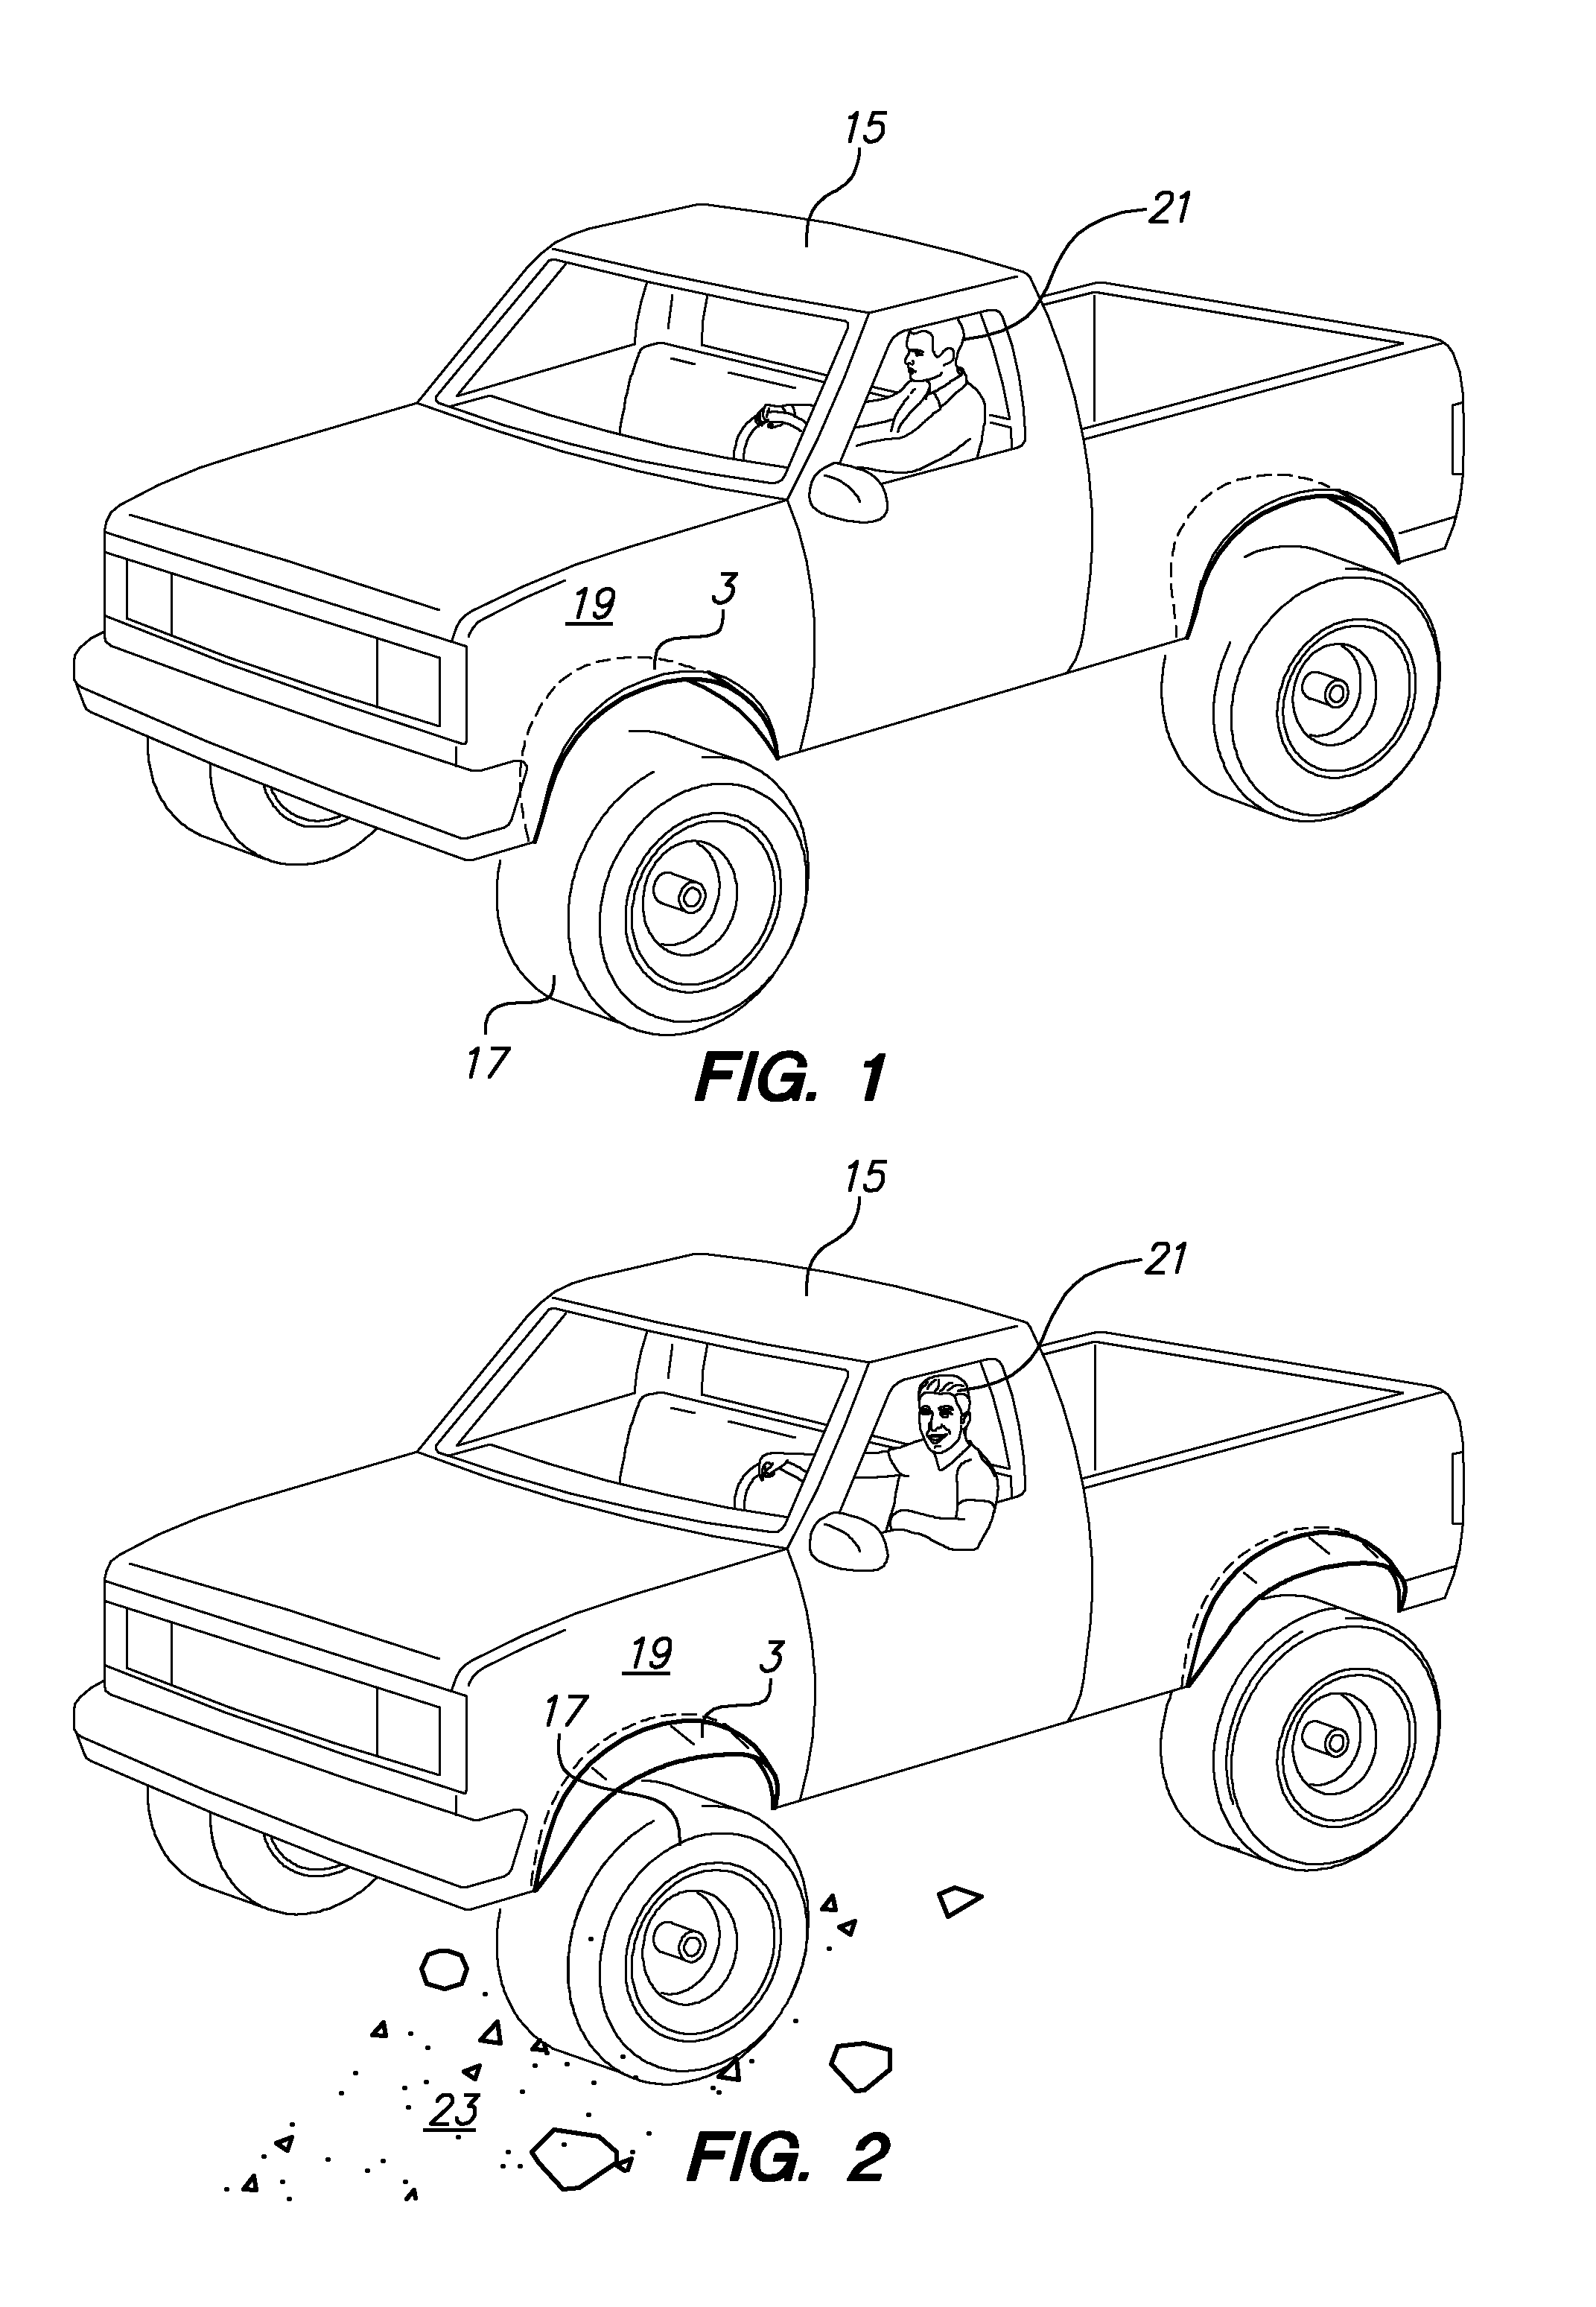 Retractable Tangential Debris Deflector for Vehicle Occupant Safety